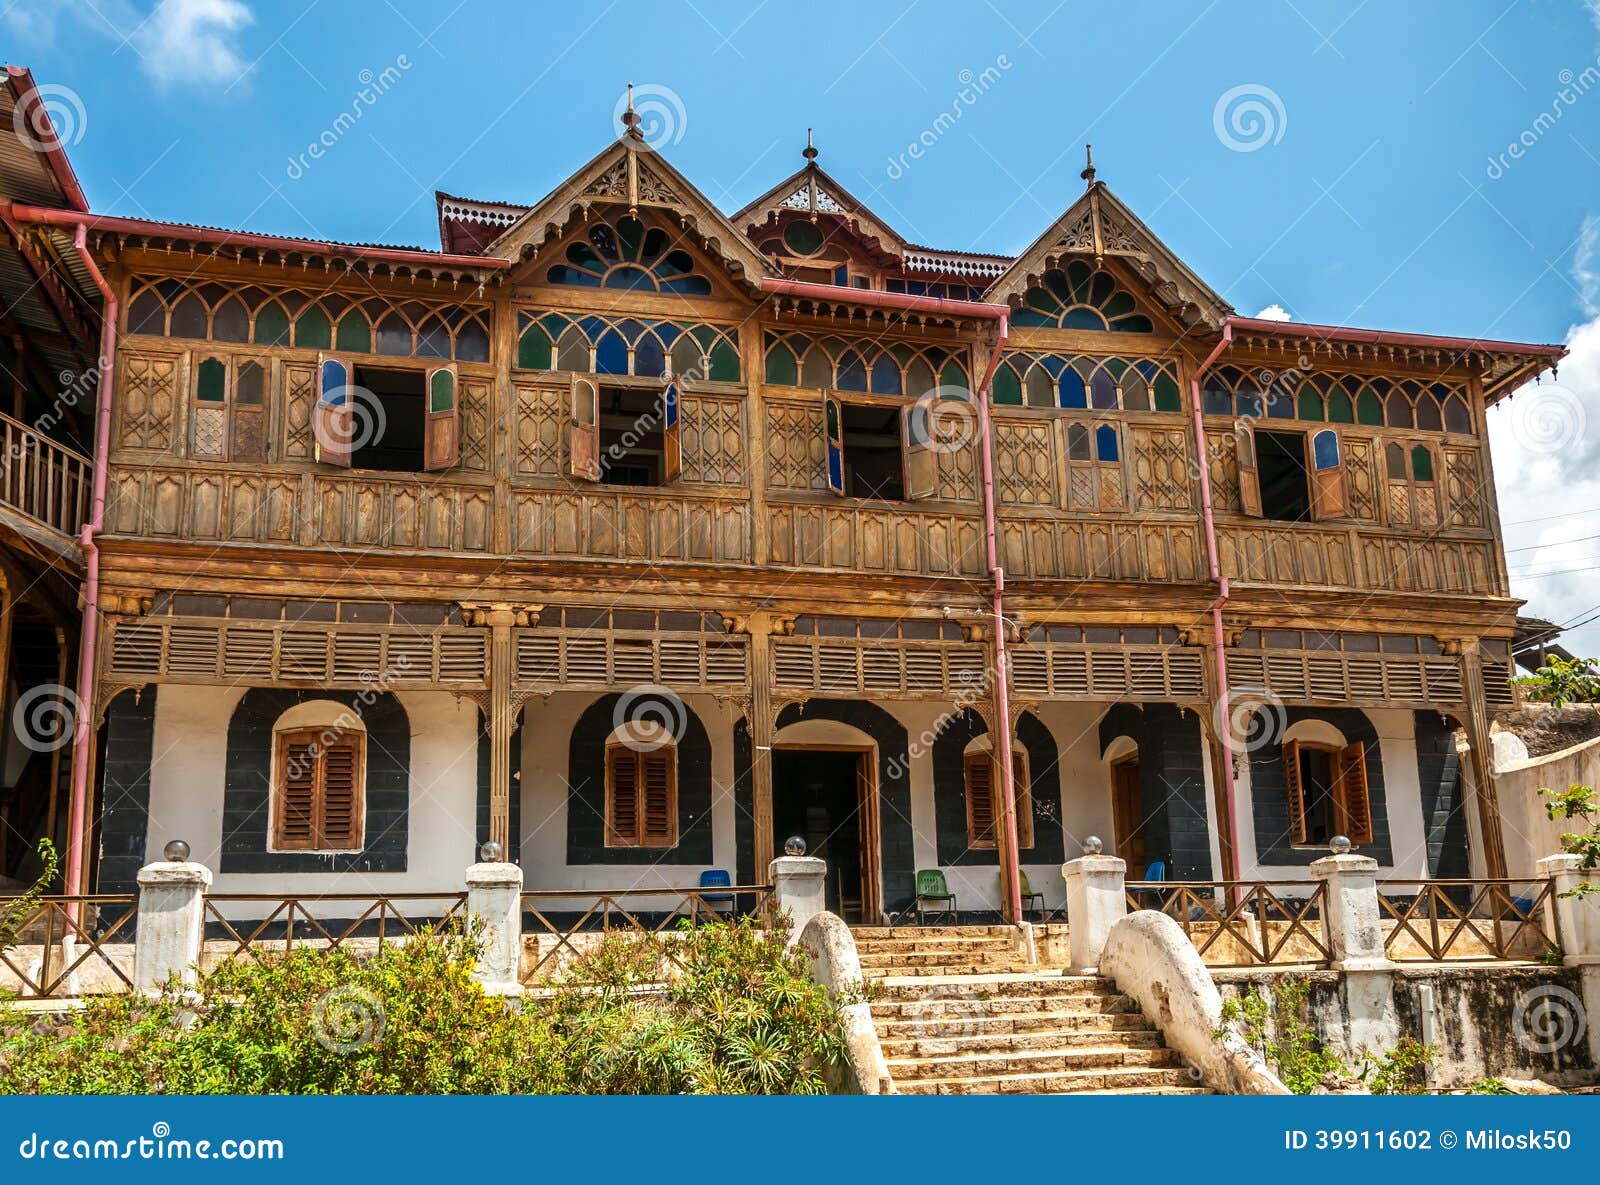 HARAR, ETHIOPIA - MARCH 28,2014 - Wooden house in Harare. House of 